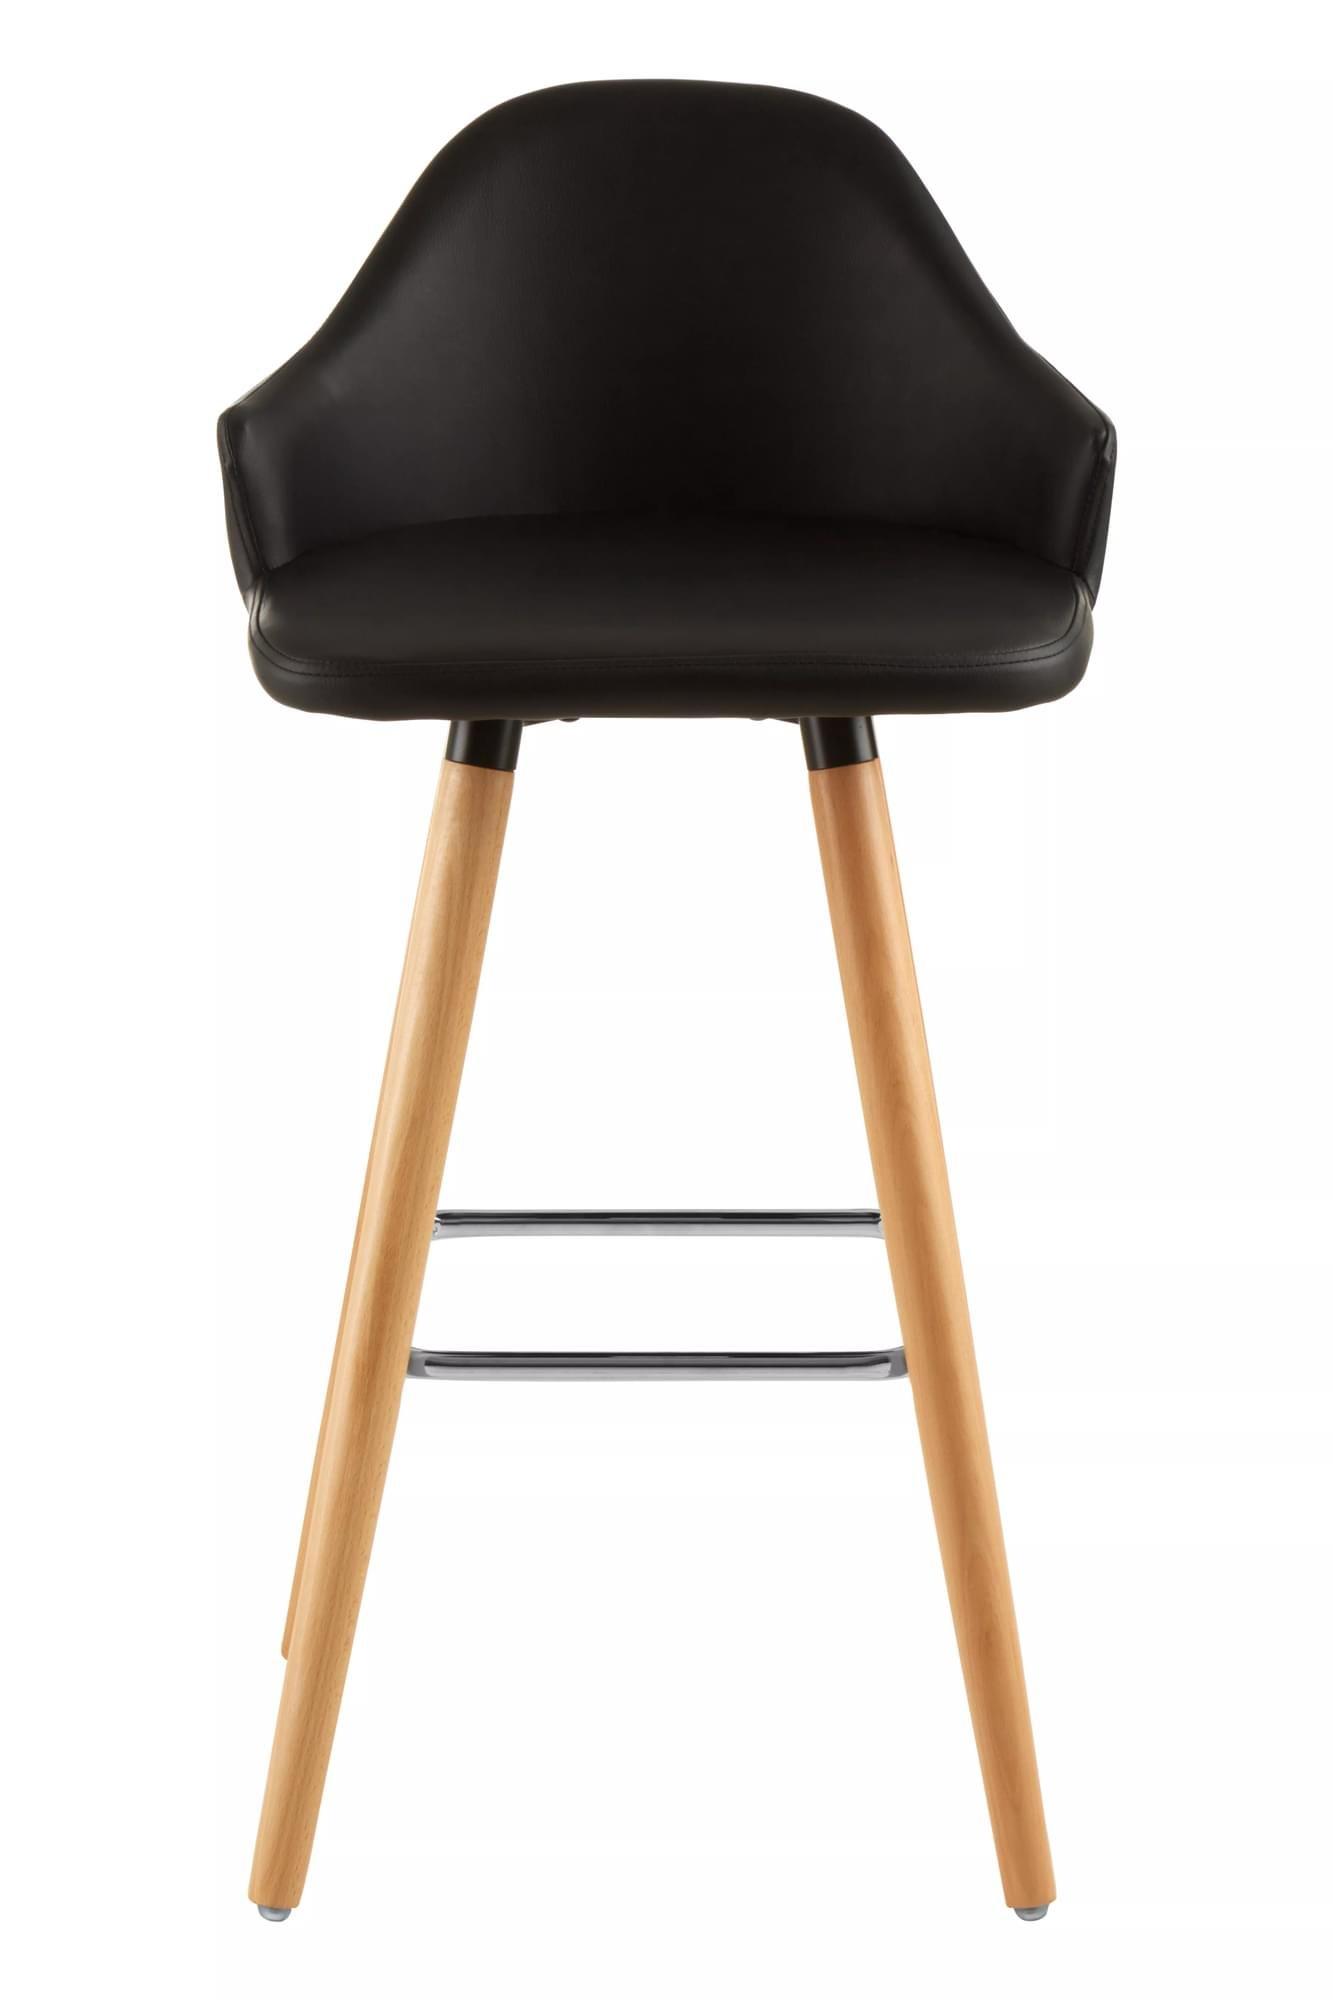 Interiors by Premier Black Curved Backrest Bar Stool, Comfortable Seating Faux Leather Bar Stool, Ea